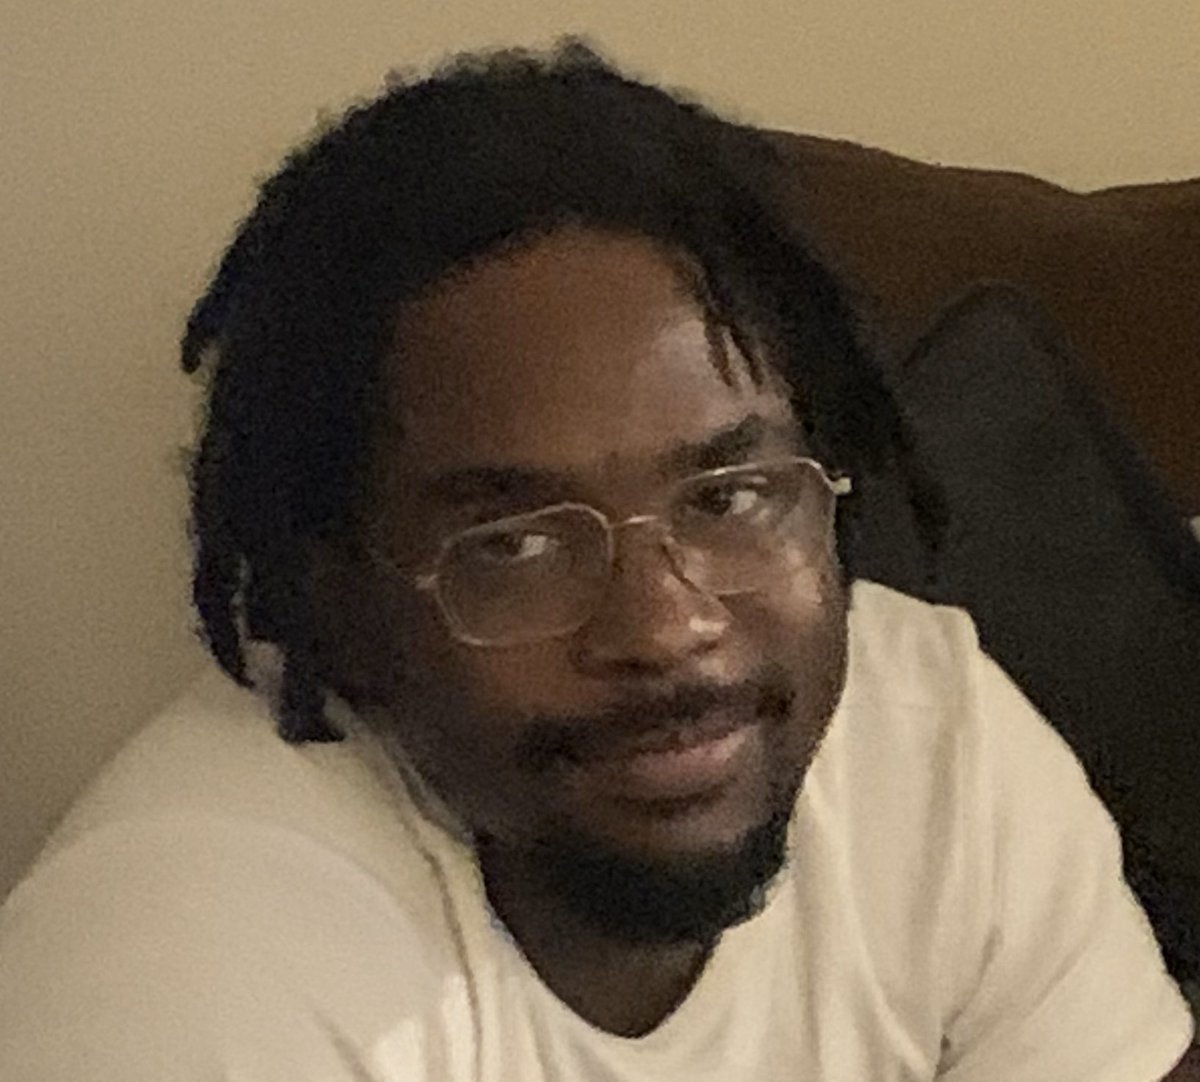 #MISSING: 32-year-old Quantae Arthur (5'5', 150 lbs.) Last seen on November 20, 2023. No known clothing description. He had been traveling from Baltimore City to the Essex area. Anyone with information, please call 911 or 410-307-2020. #help #locate